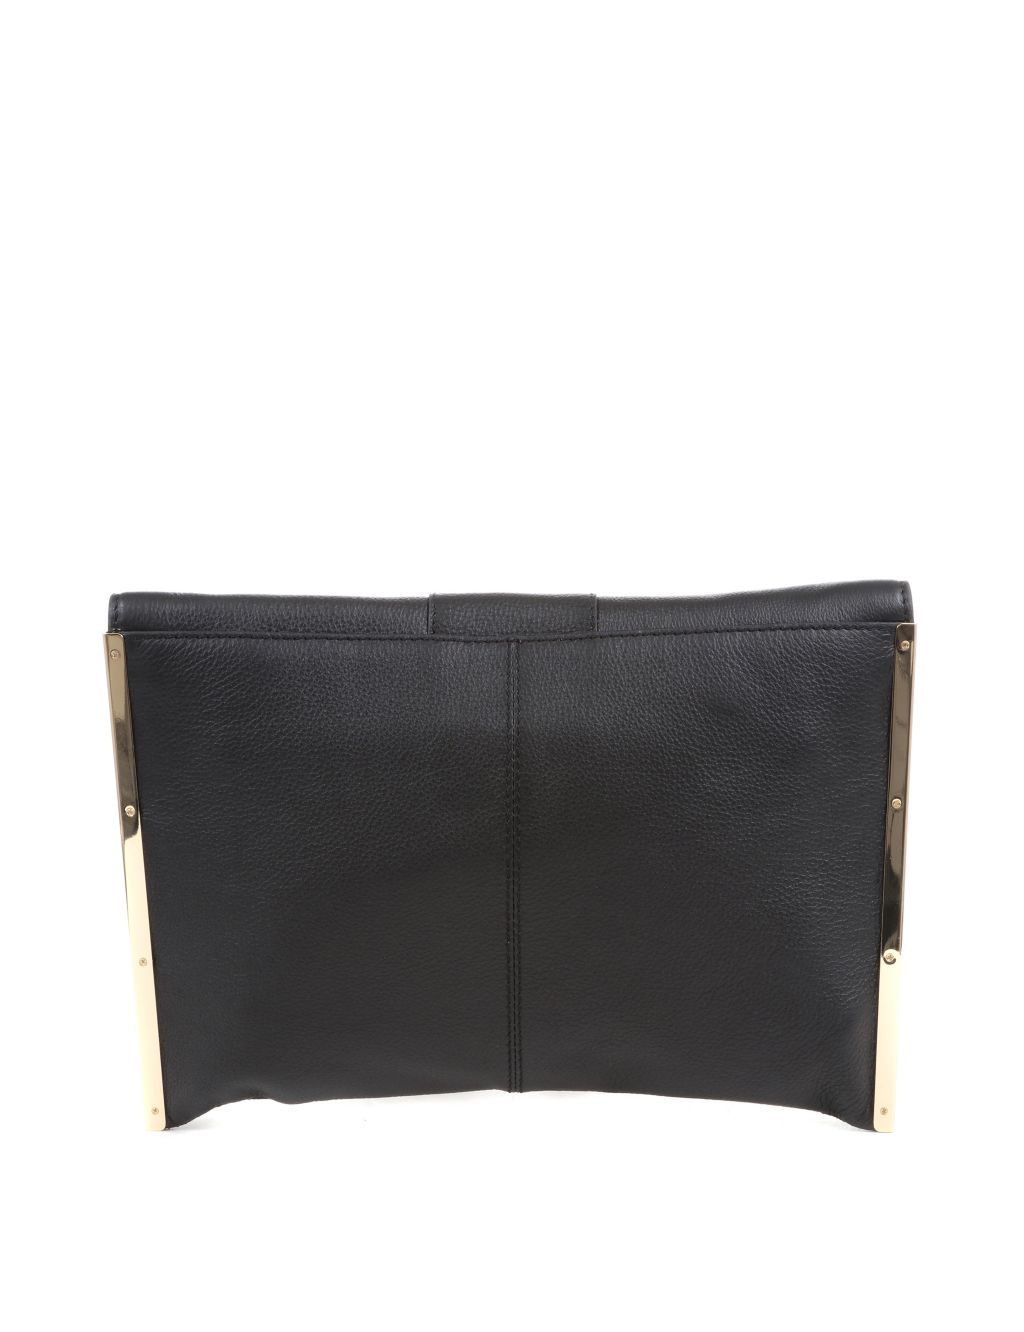 Leather Clutch Bag image 2